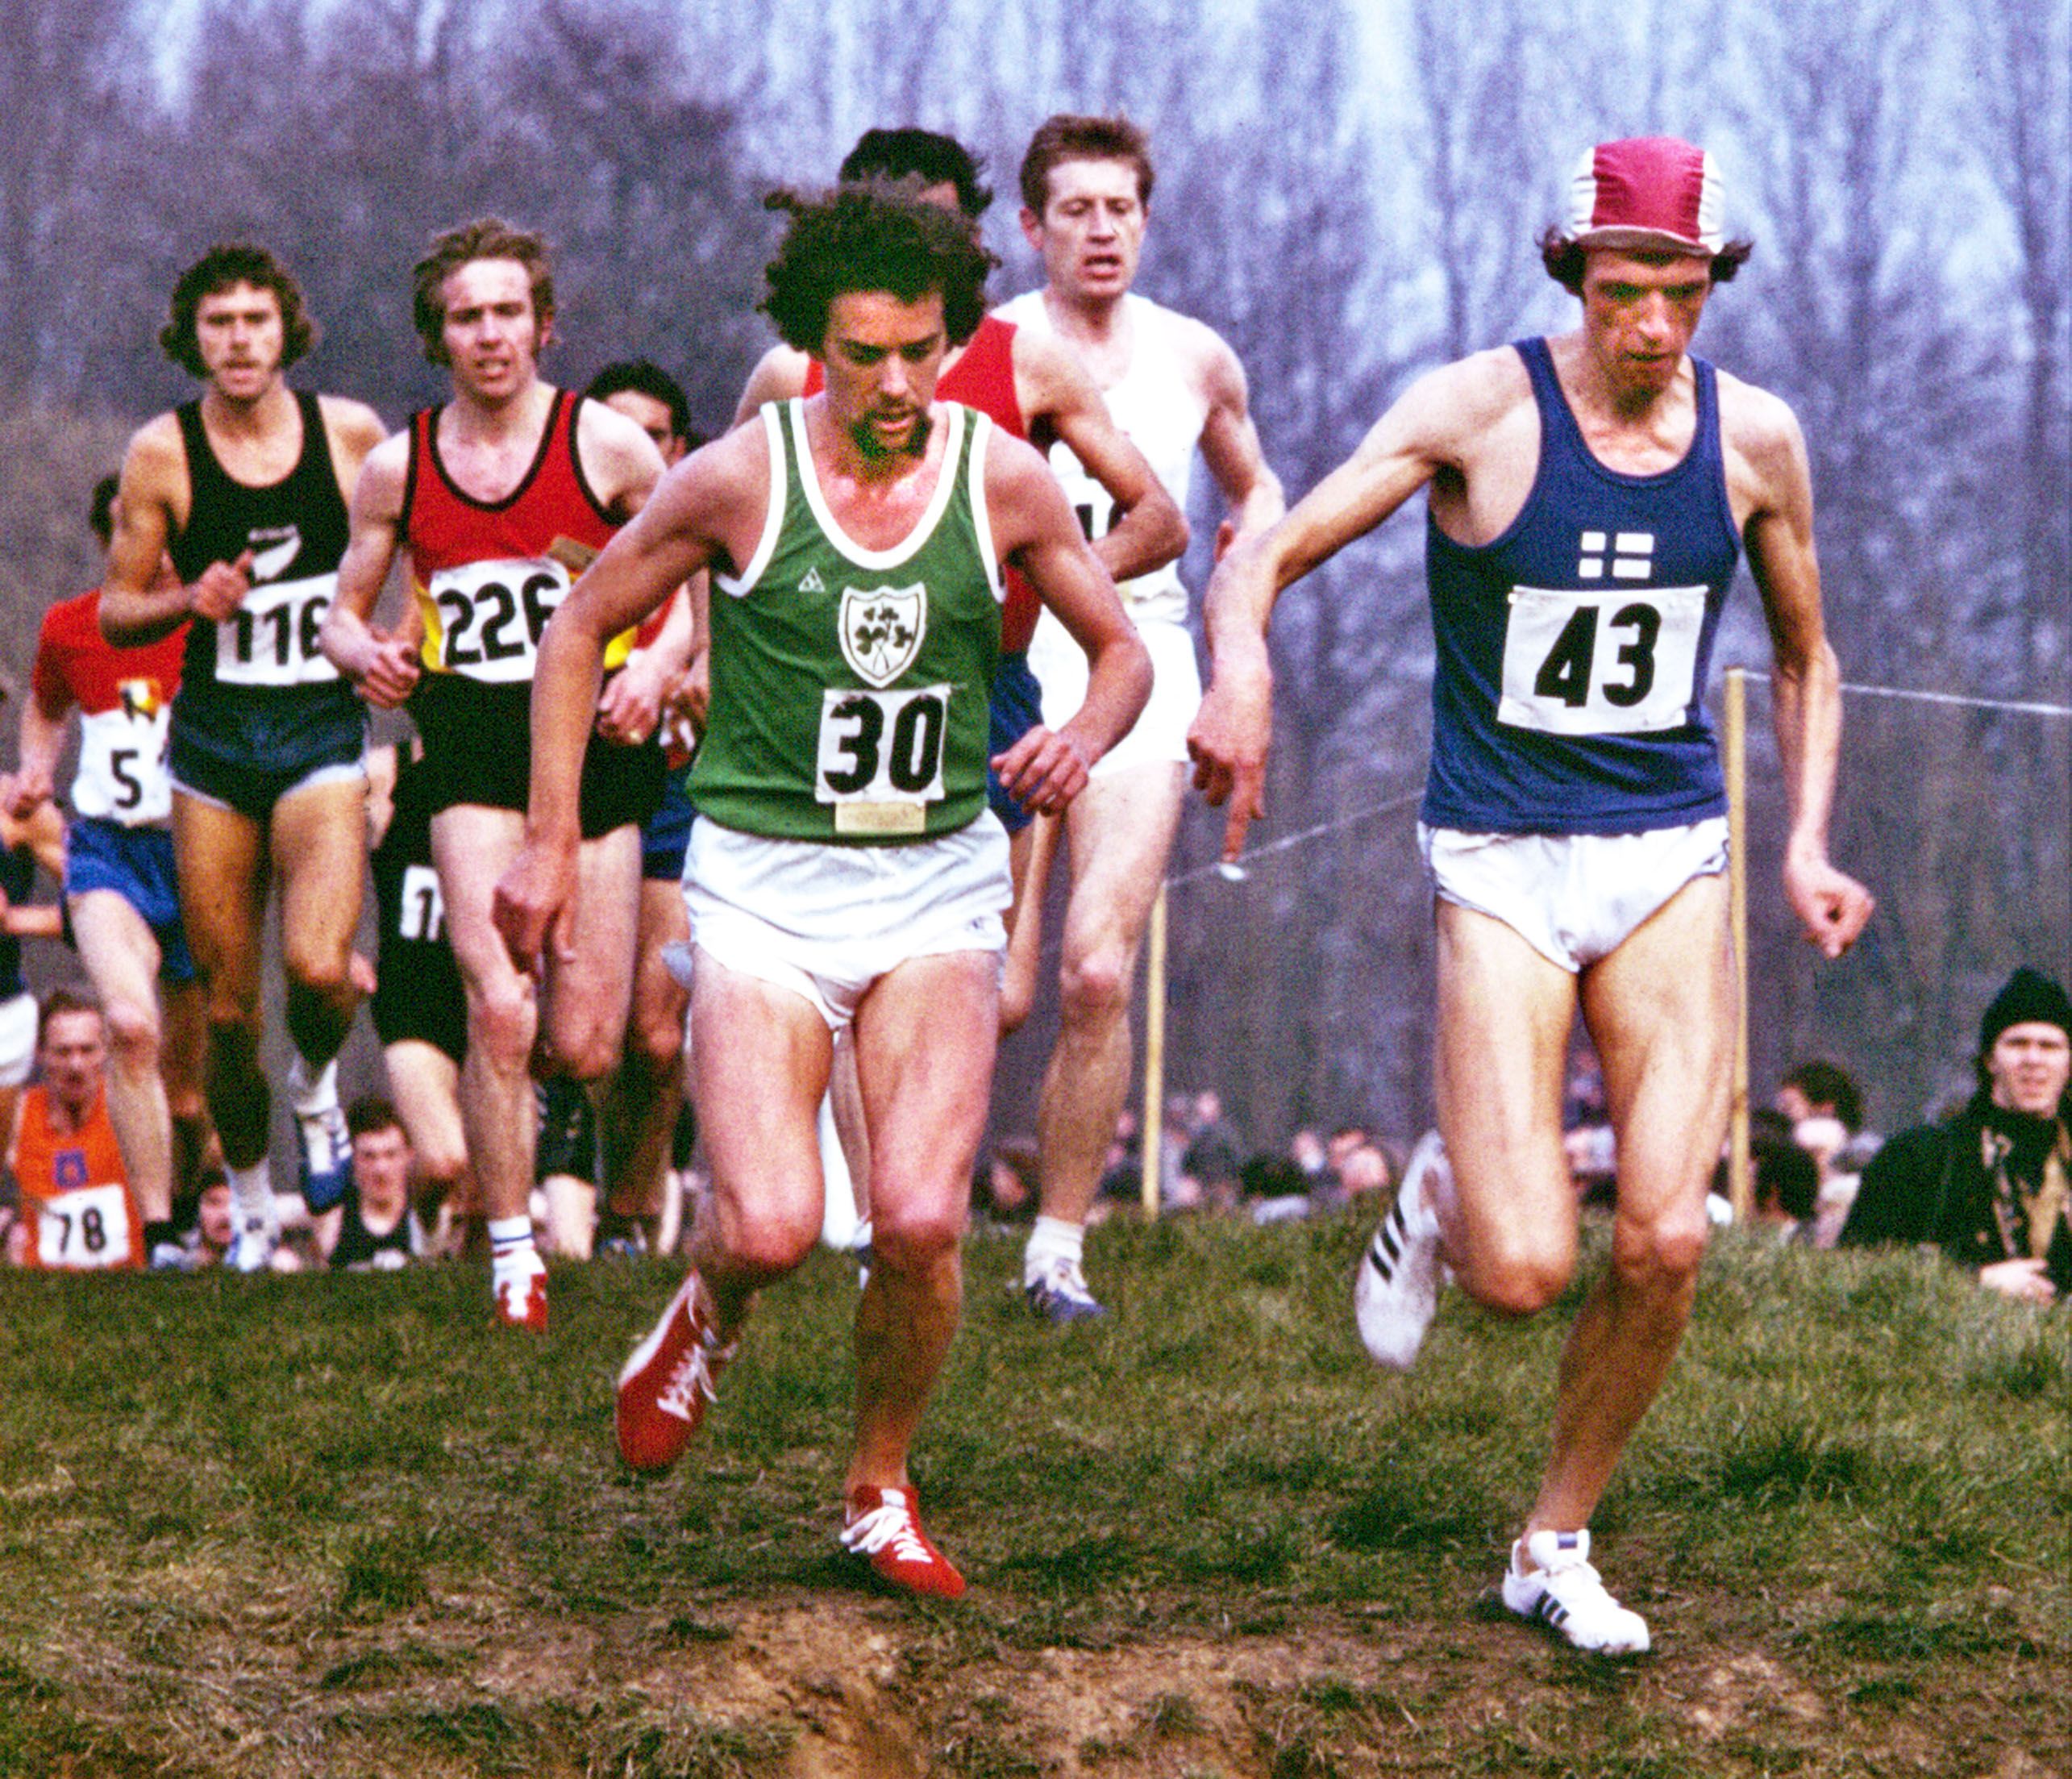 Pekka Paivarinta leads from Neil Cusack at the inaugural World Cross Country Championships